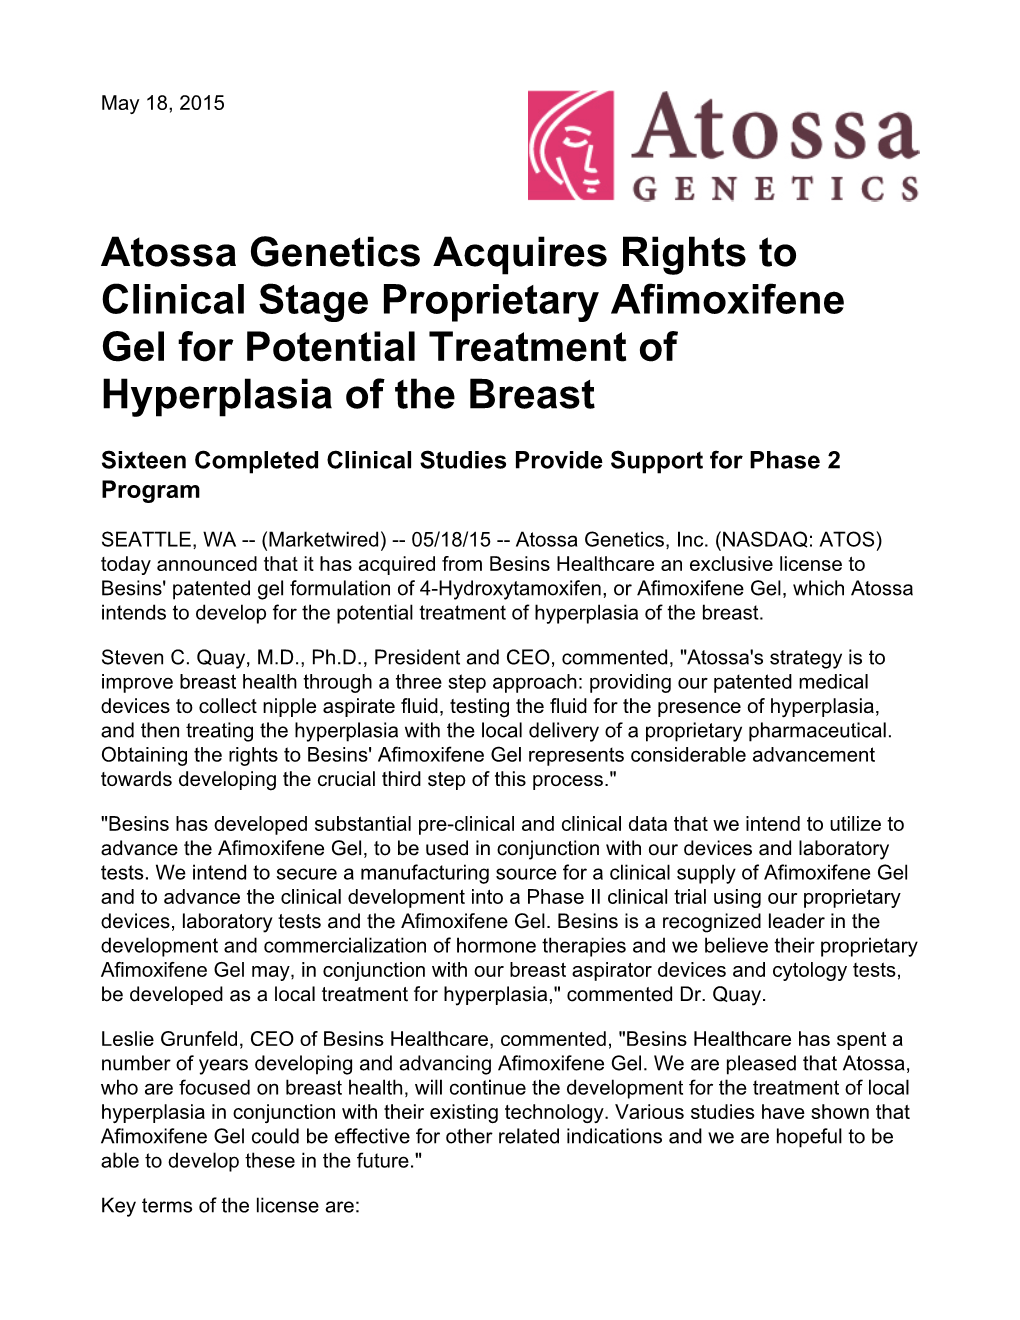 Atossa Genetics Acquires Rights to Clinical Stage Proprietary Afimoxifene Gel for Potential Treatment of Hyperplasia of the Breast